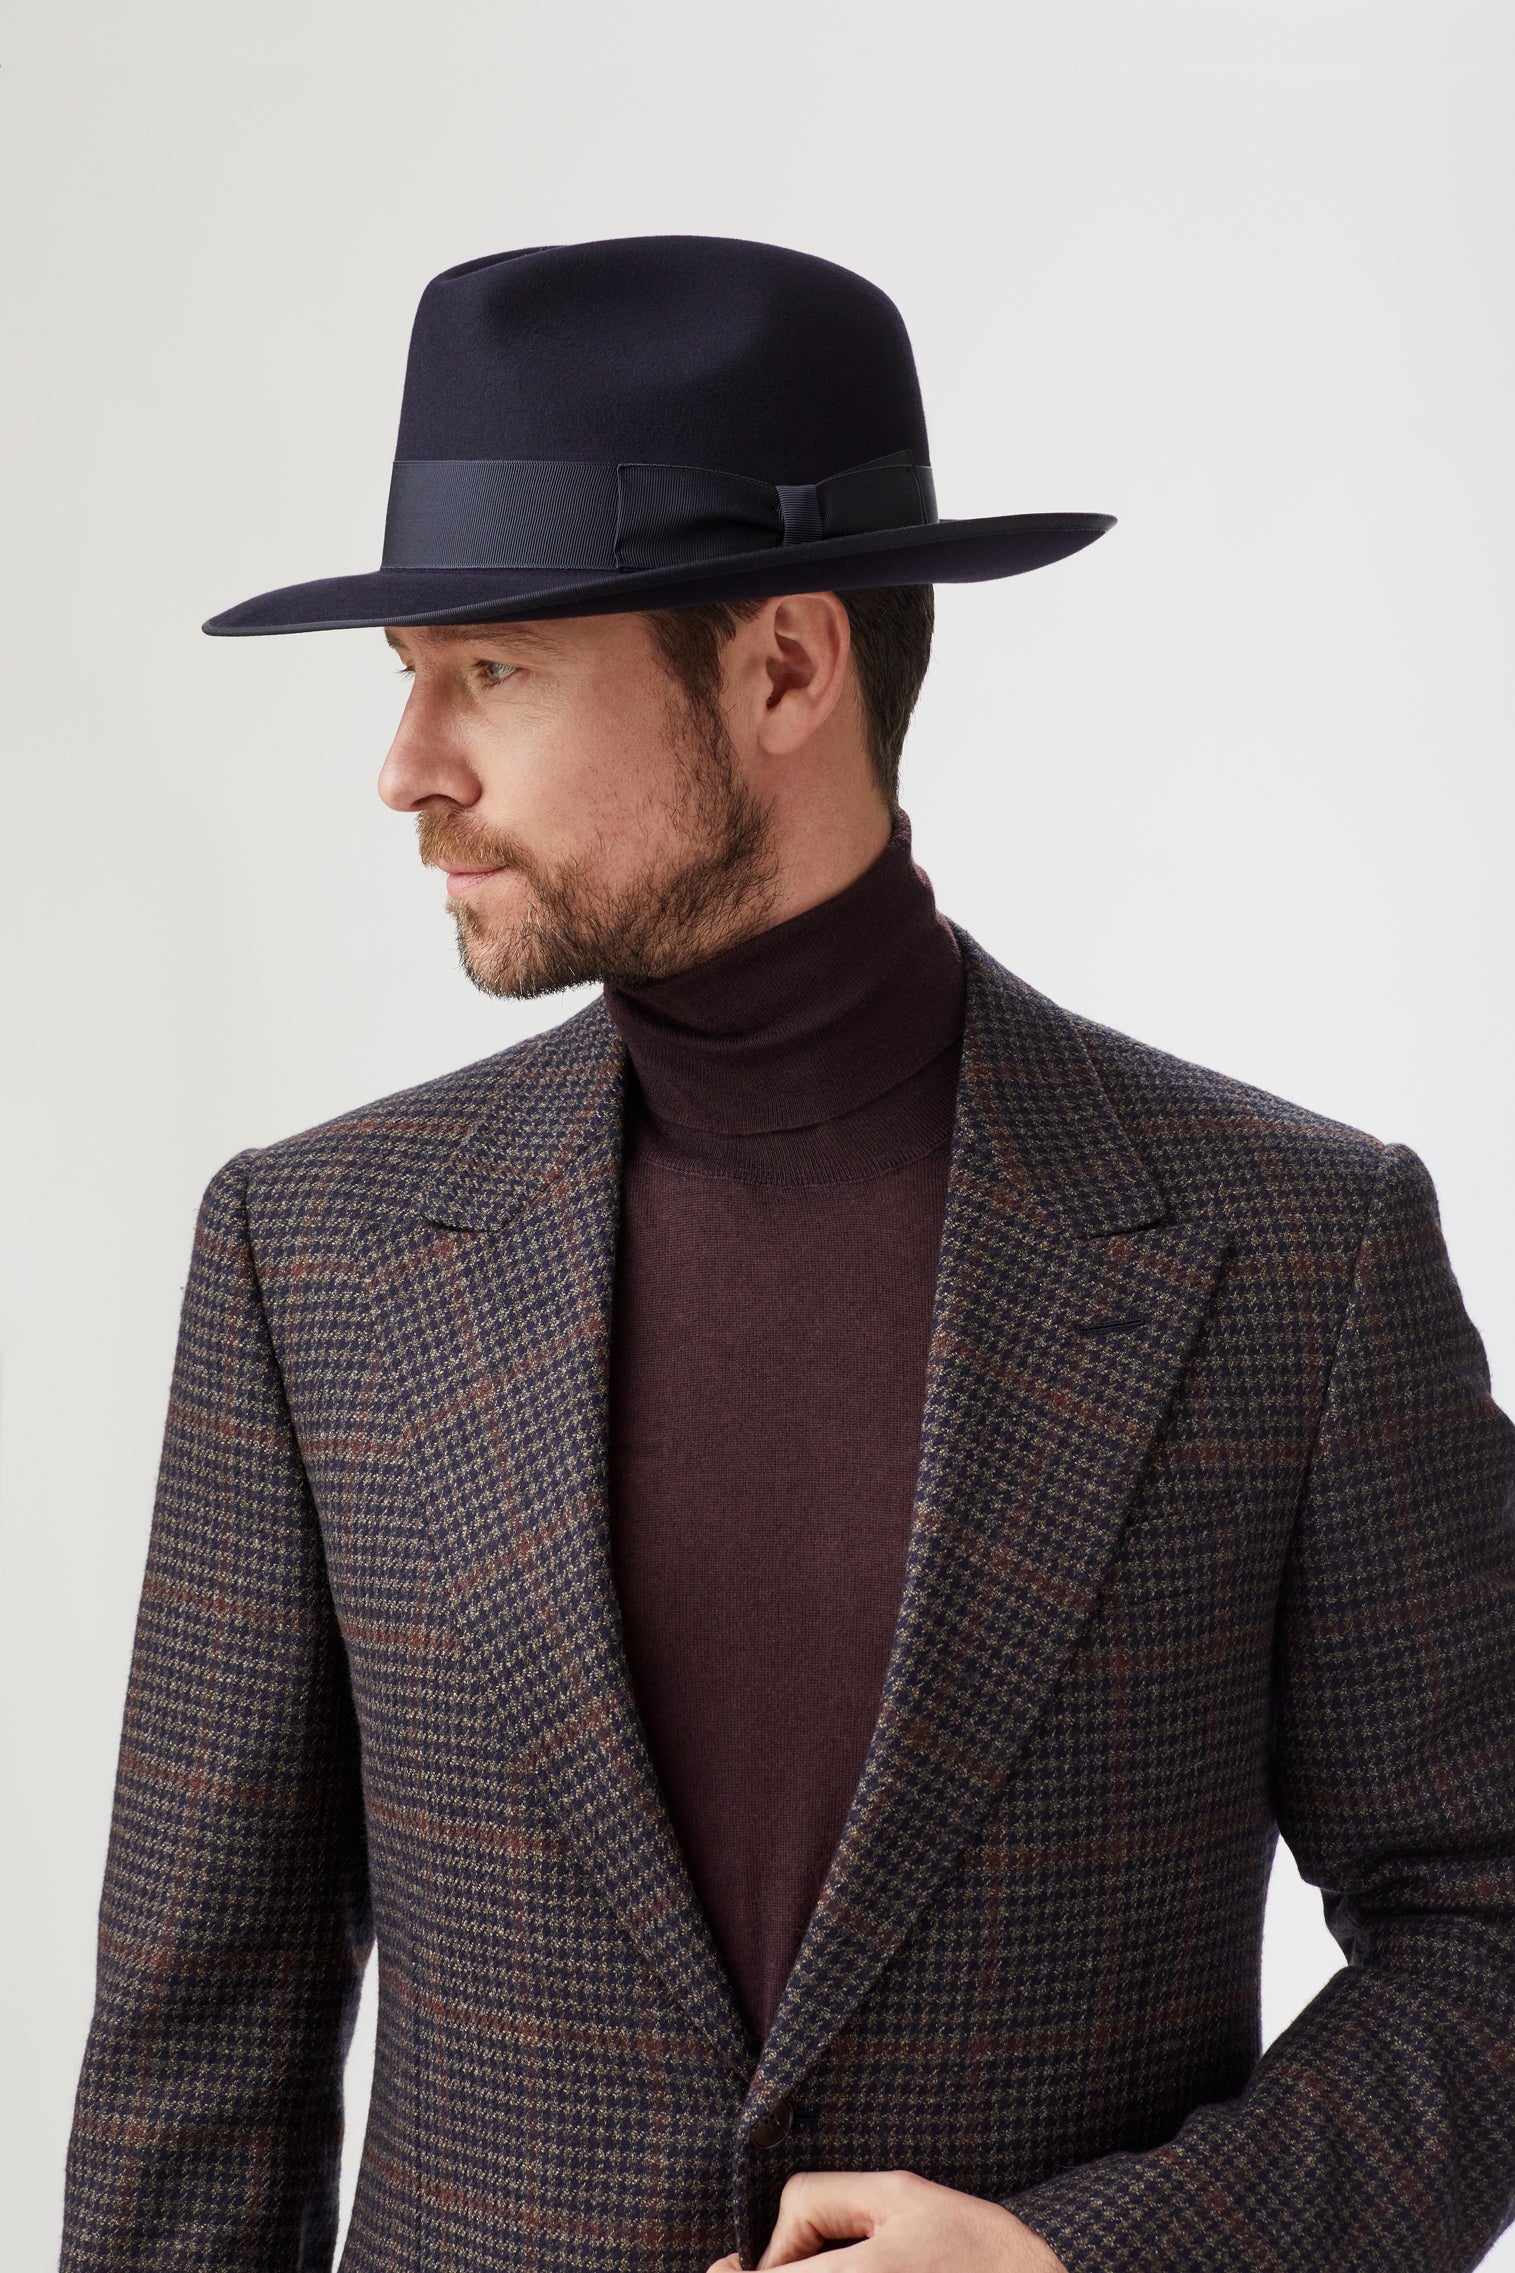 St James's Fedora - Father's Day Gift Guide - Lock & Co. Hatters London UK